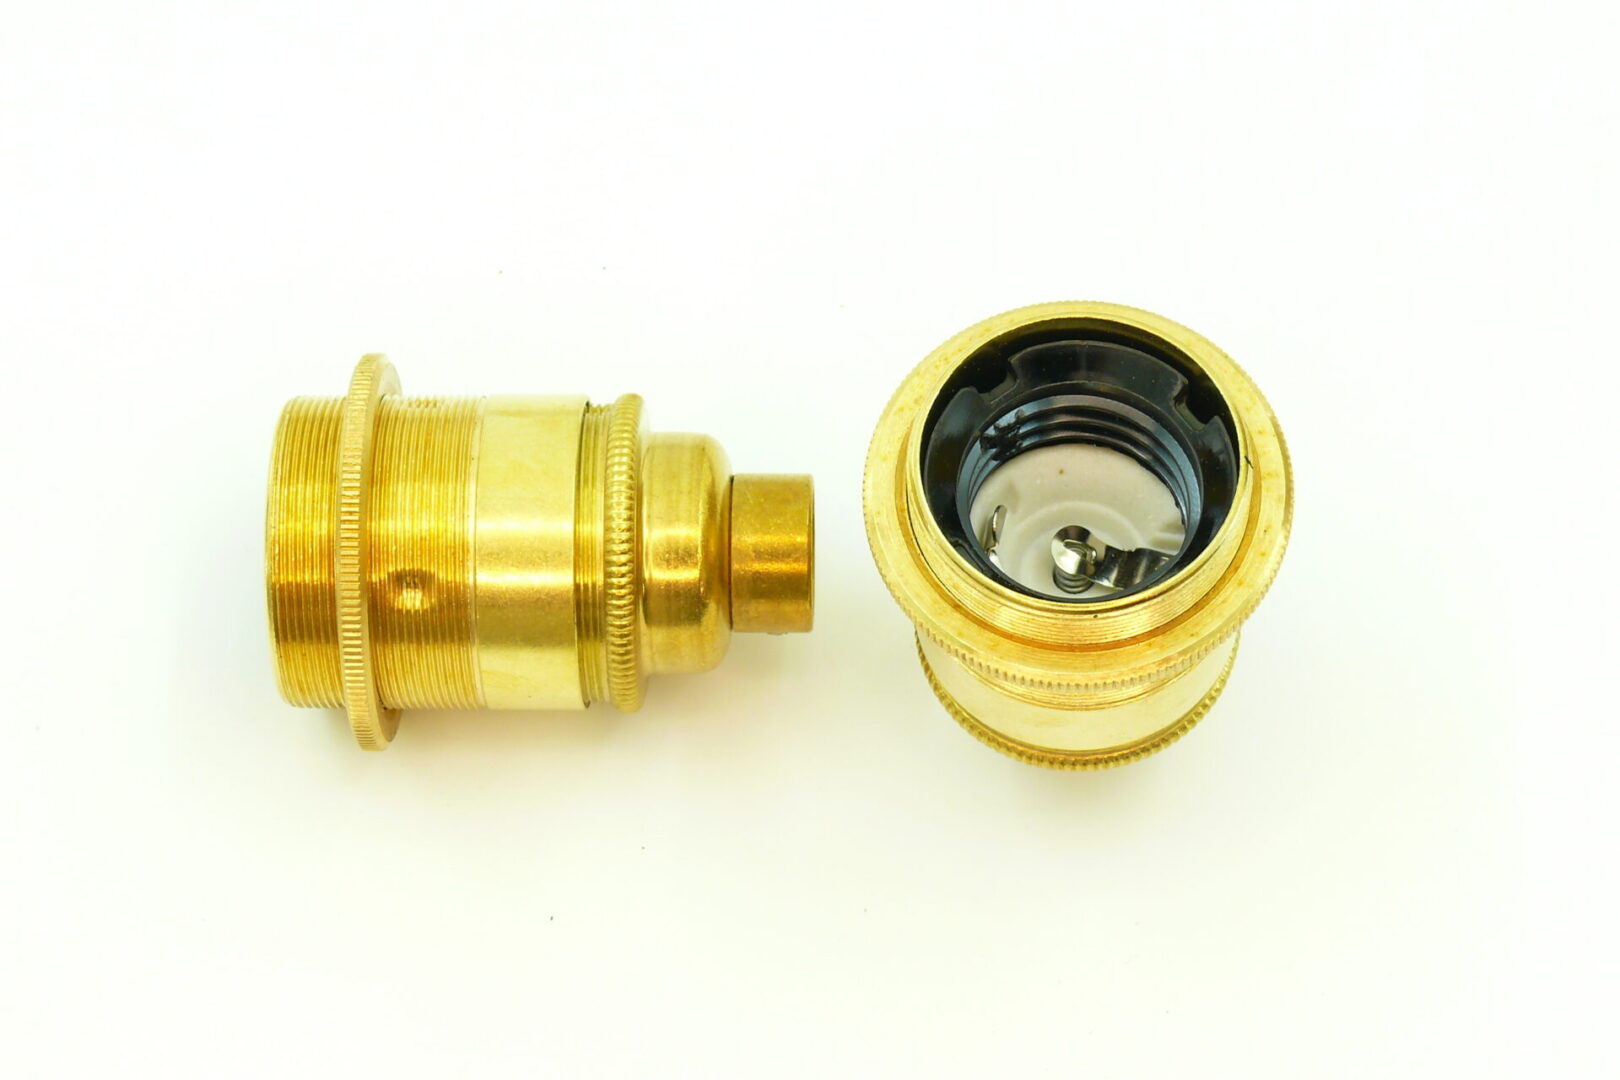 Lampholder with shade ring M16 x 1.5mm pitch - Brass Lampholders ...